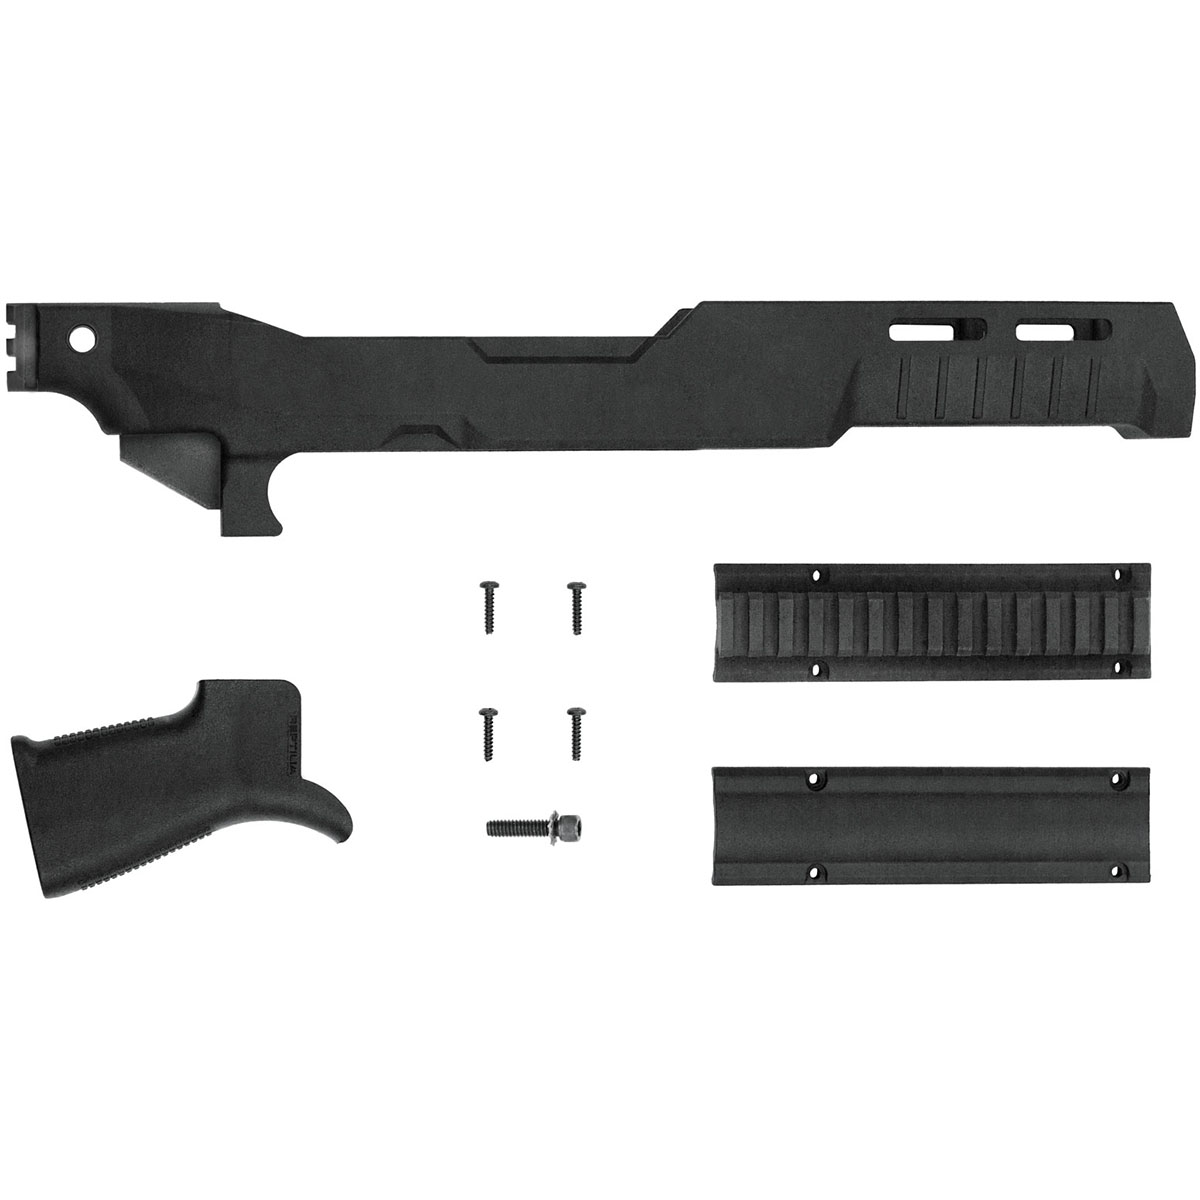 SB TACTICAL - SB22™ FIXED CHASSIS KIT FOR RUGER 10/22®